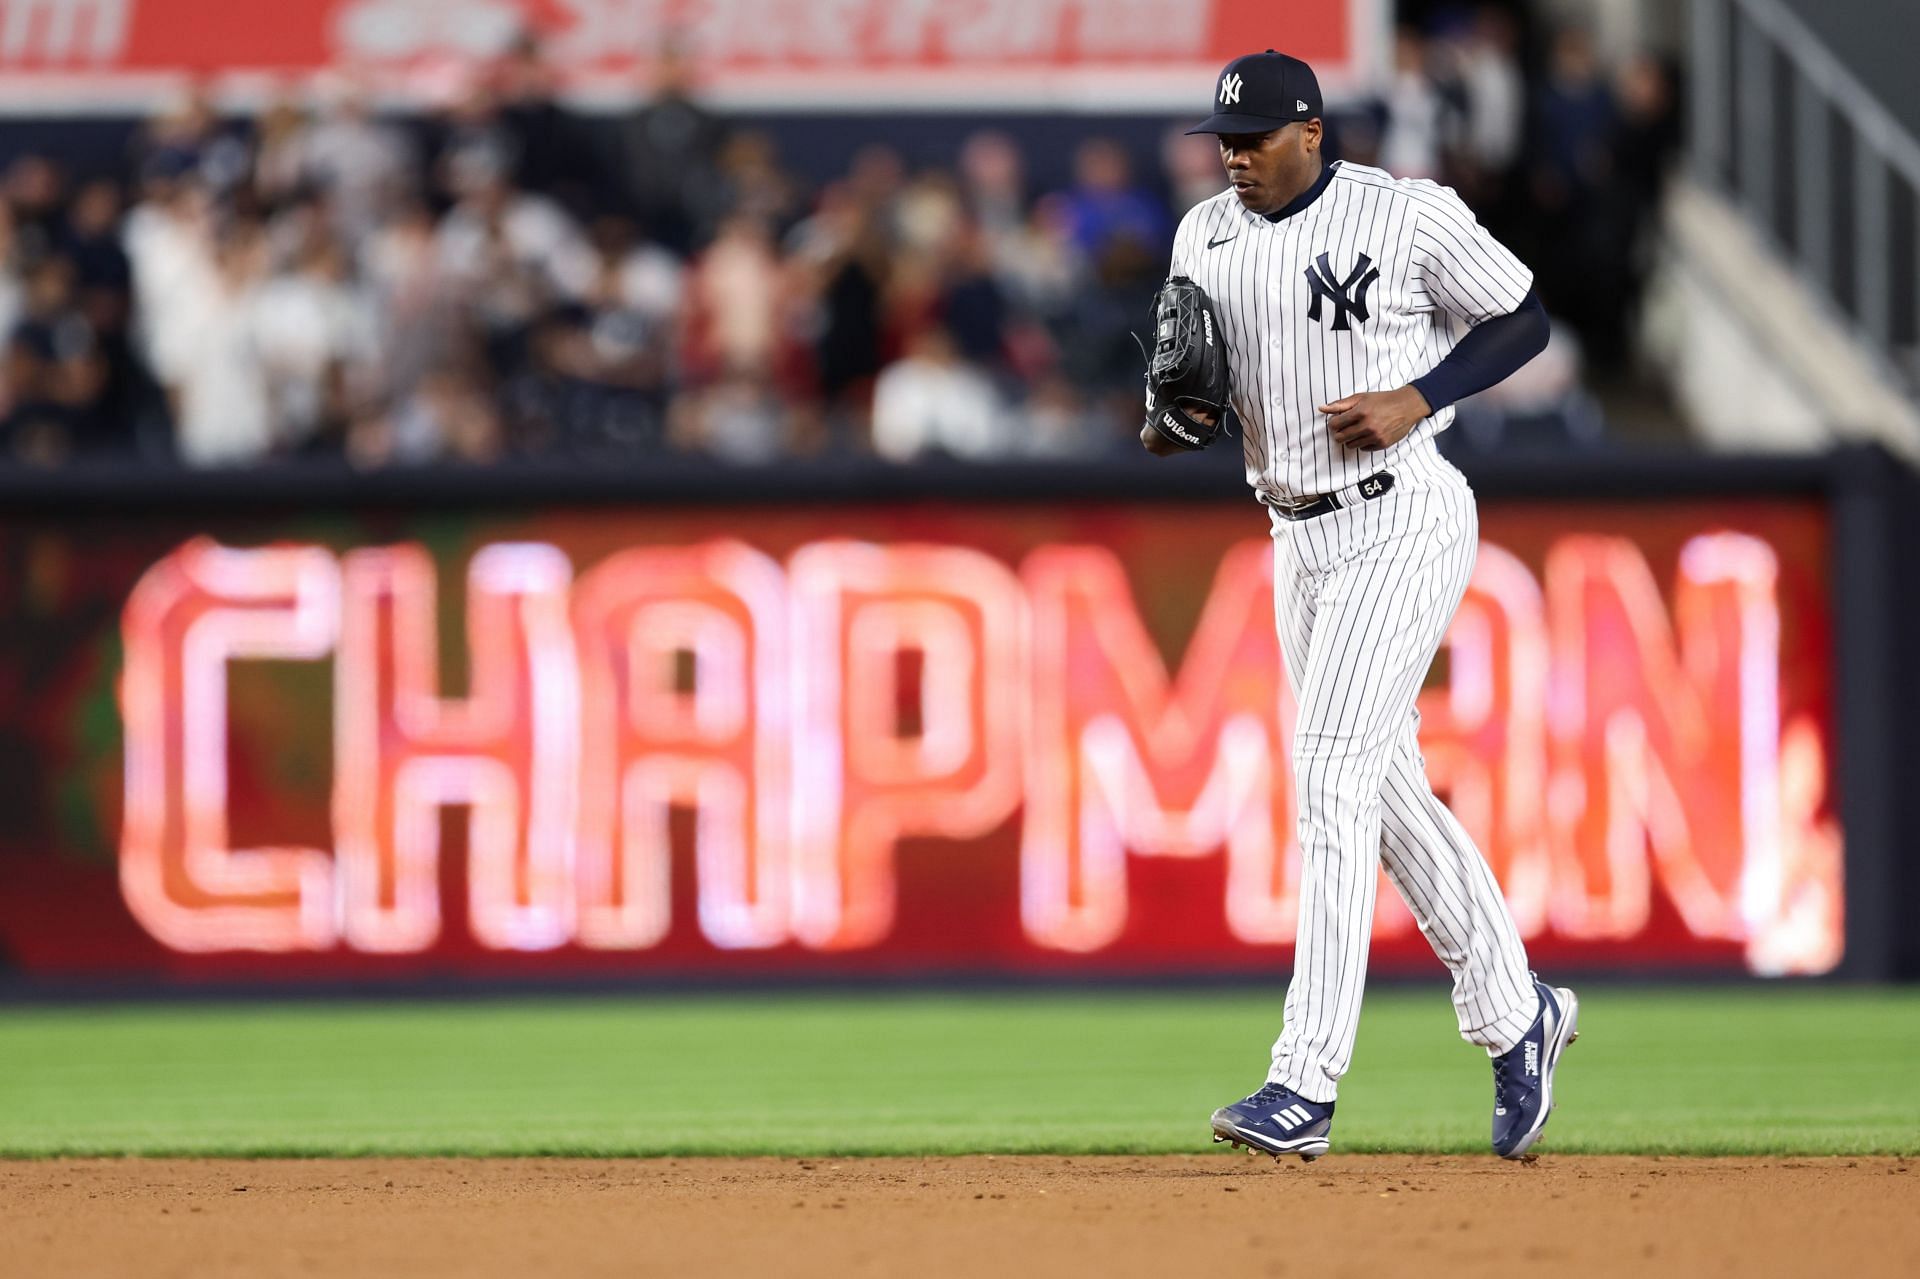 ﻿New York Yankees reliver Aroldis Chapman walked 3 and failed to record an out in the 9th inning